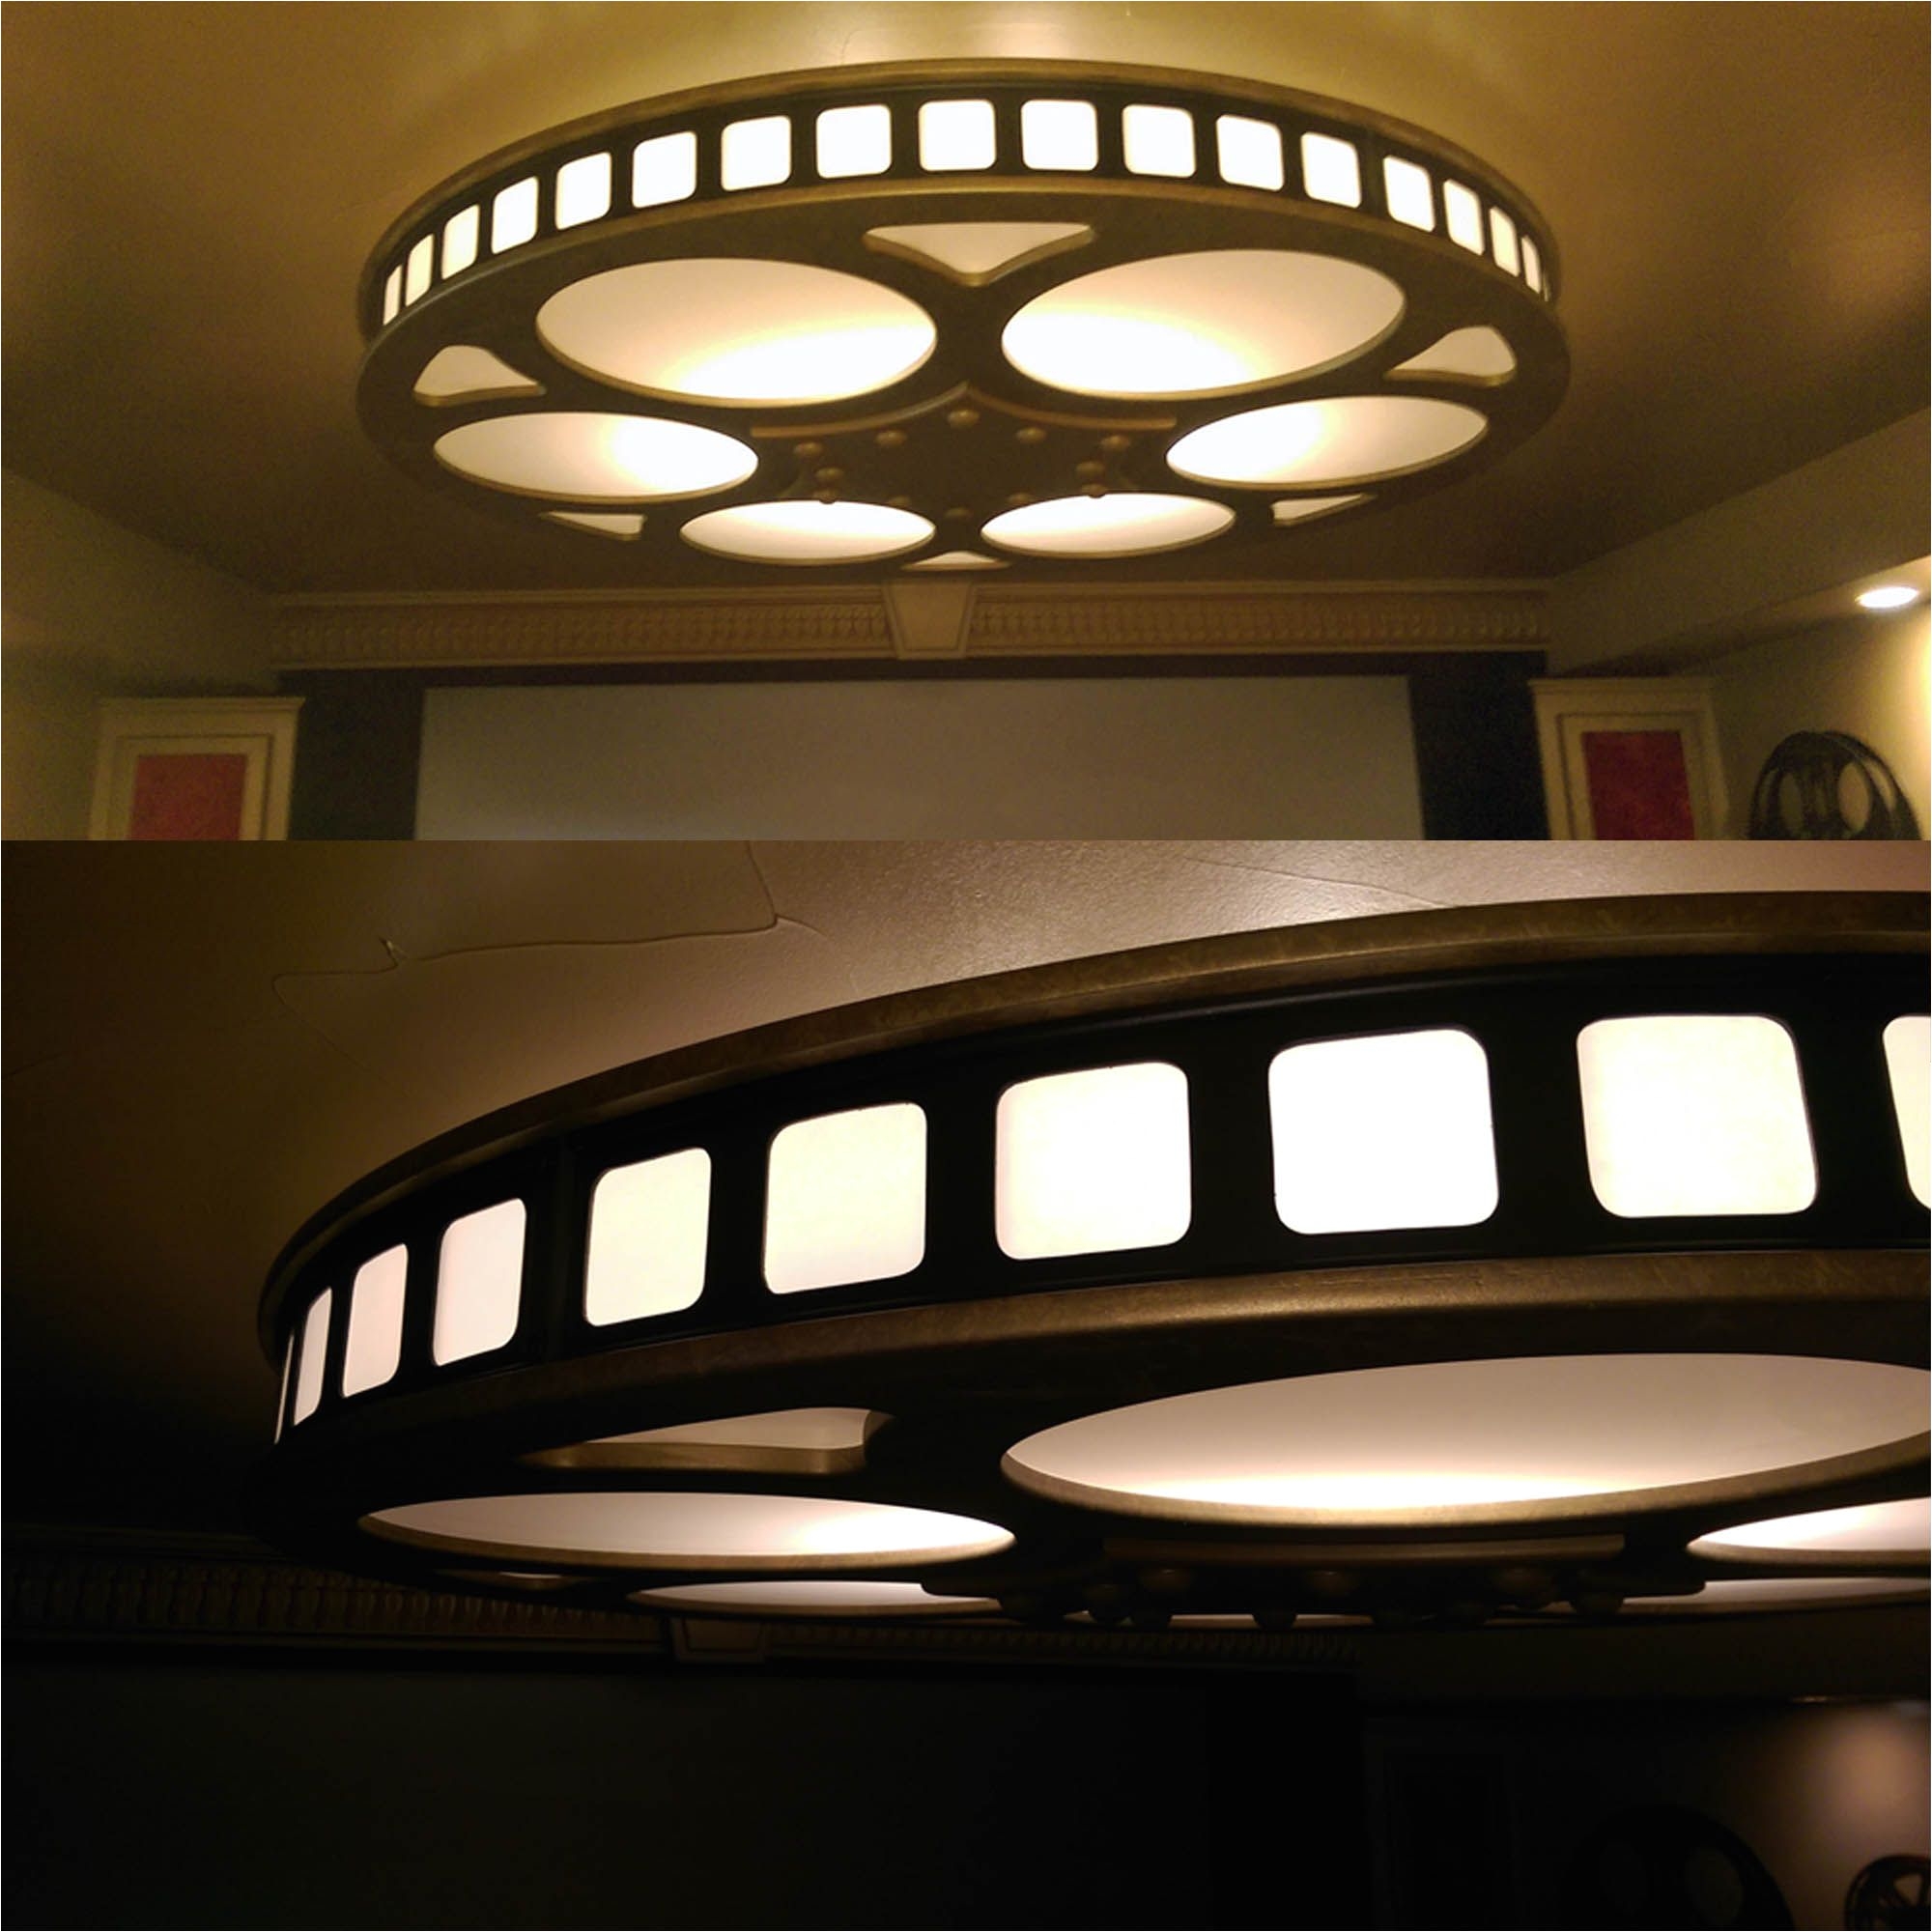 custom 6 ft wide cieling light designed and built by marioarts and can be found at